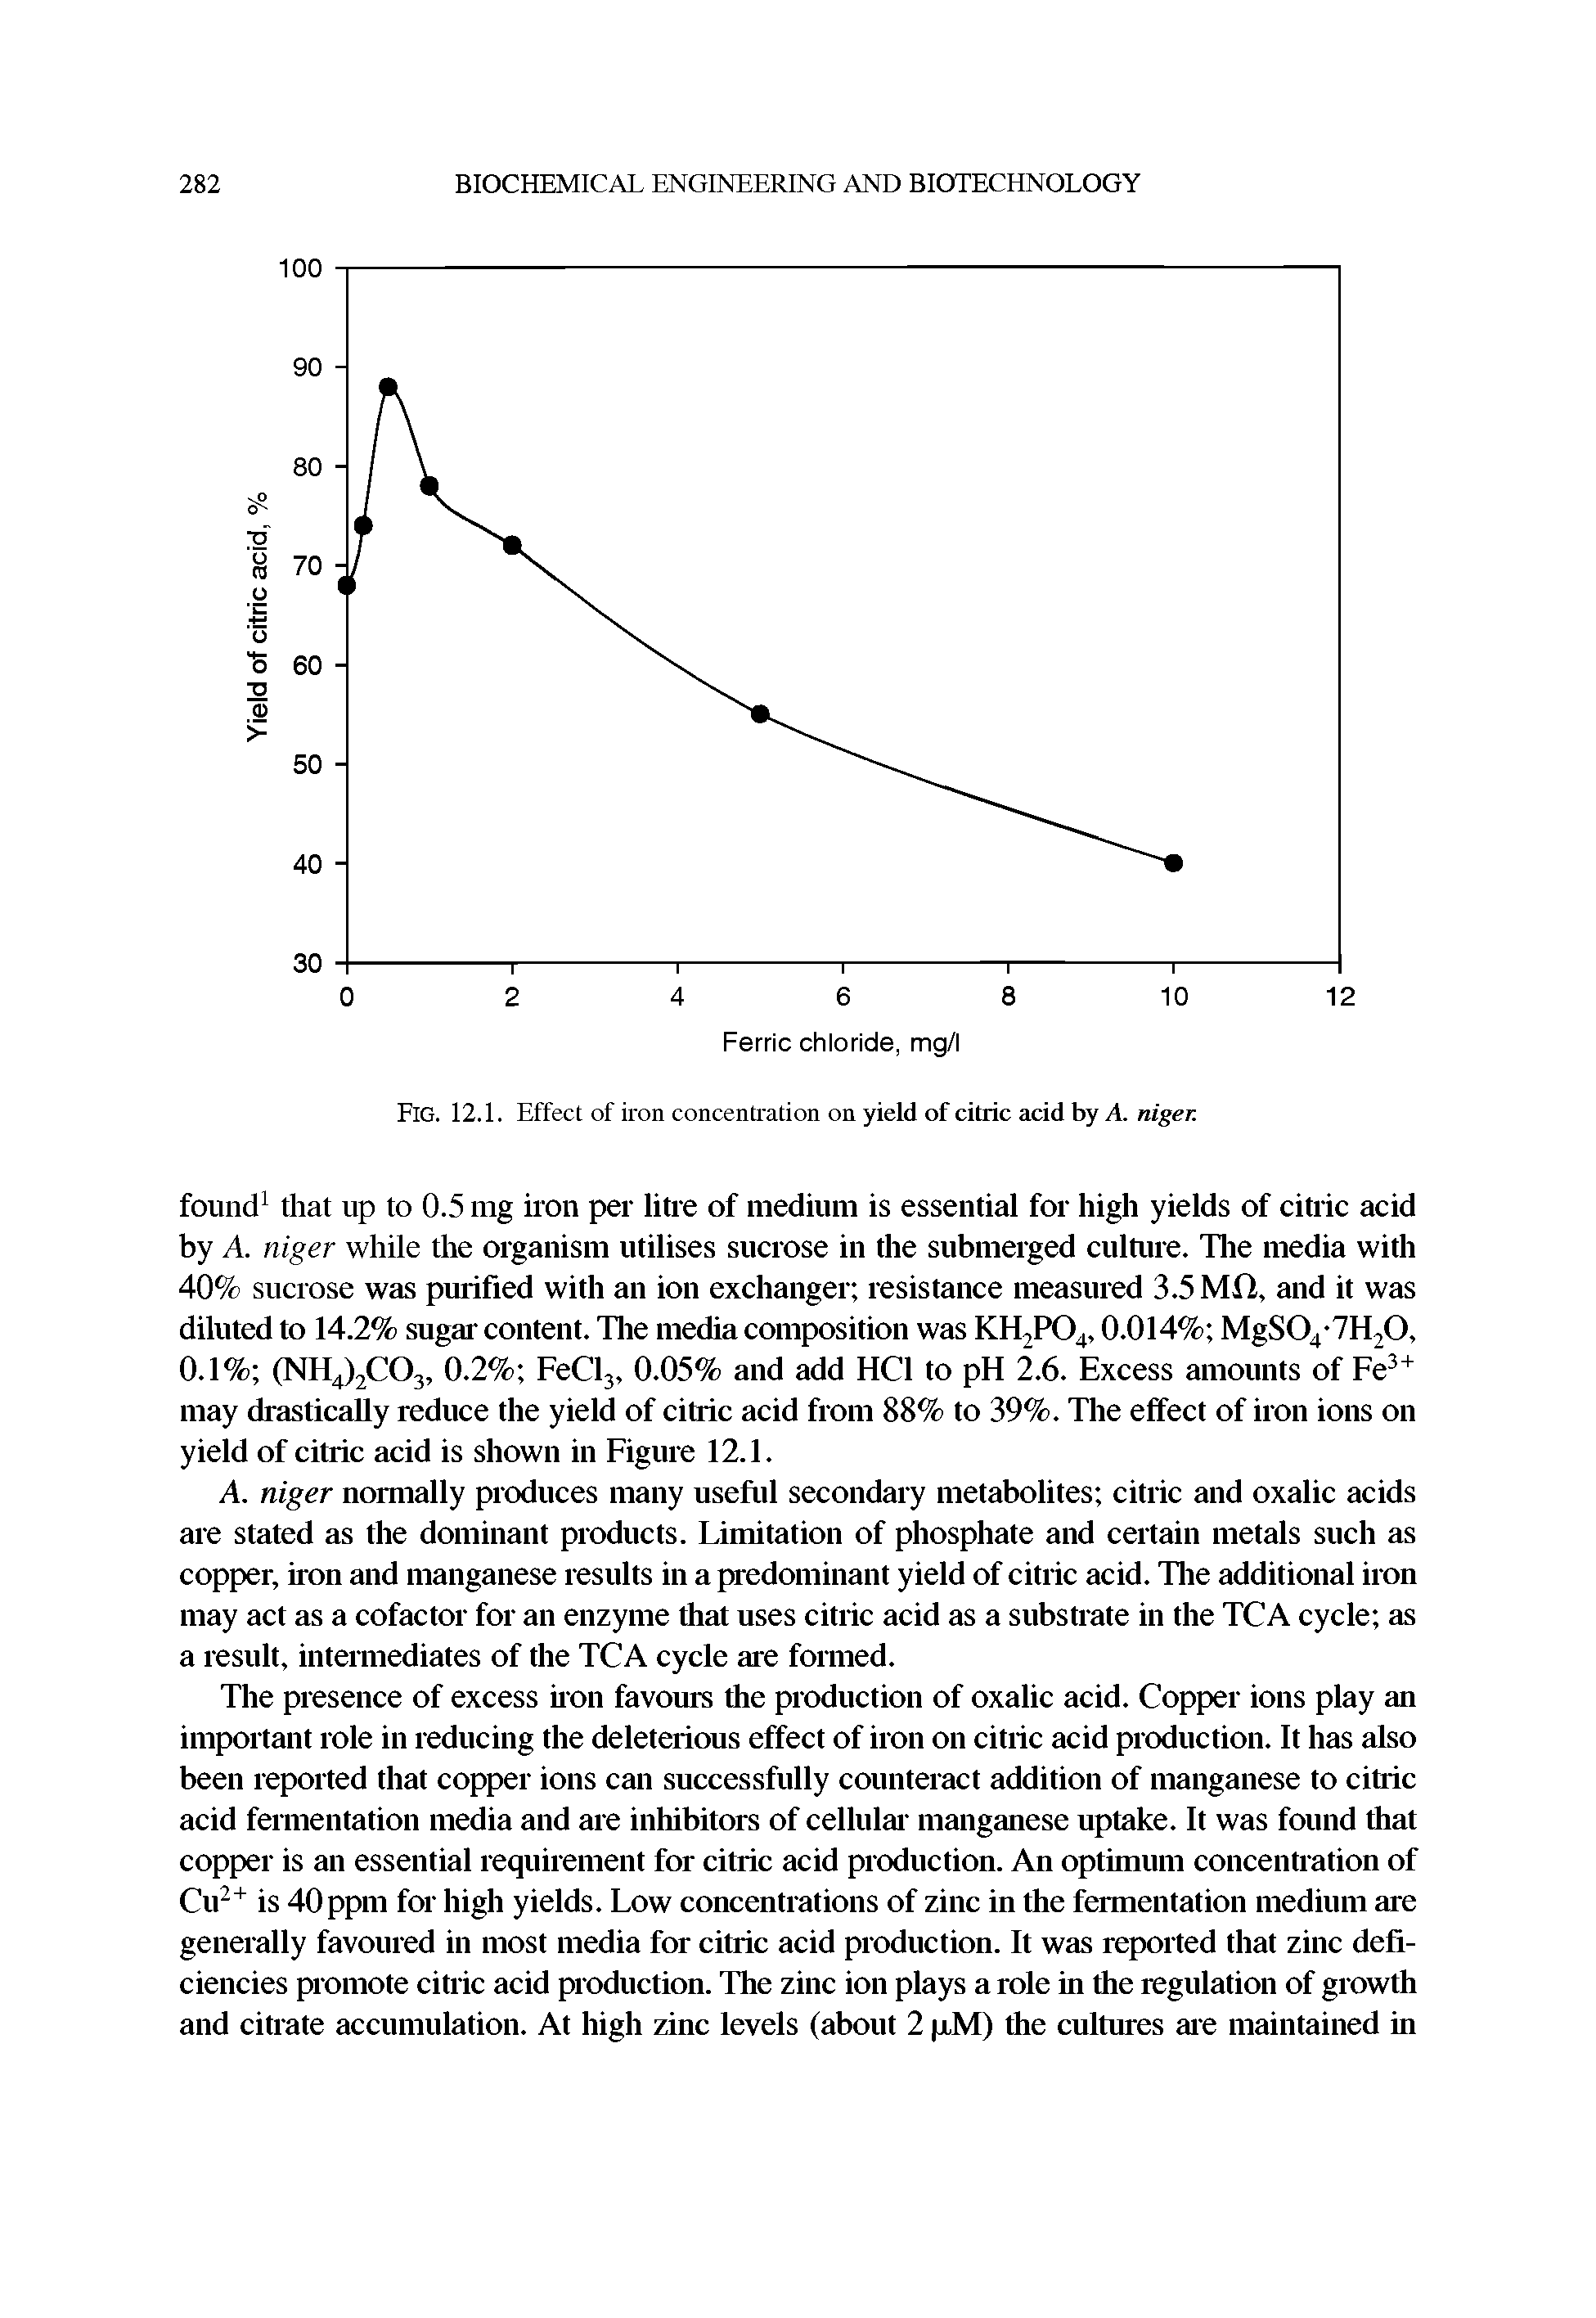 Fig. 12.1. Effect of iron concentration on yield of citric acid by A. niger.